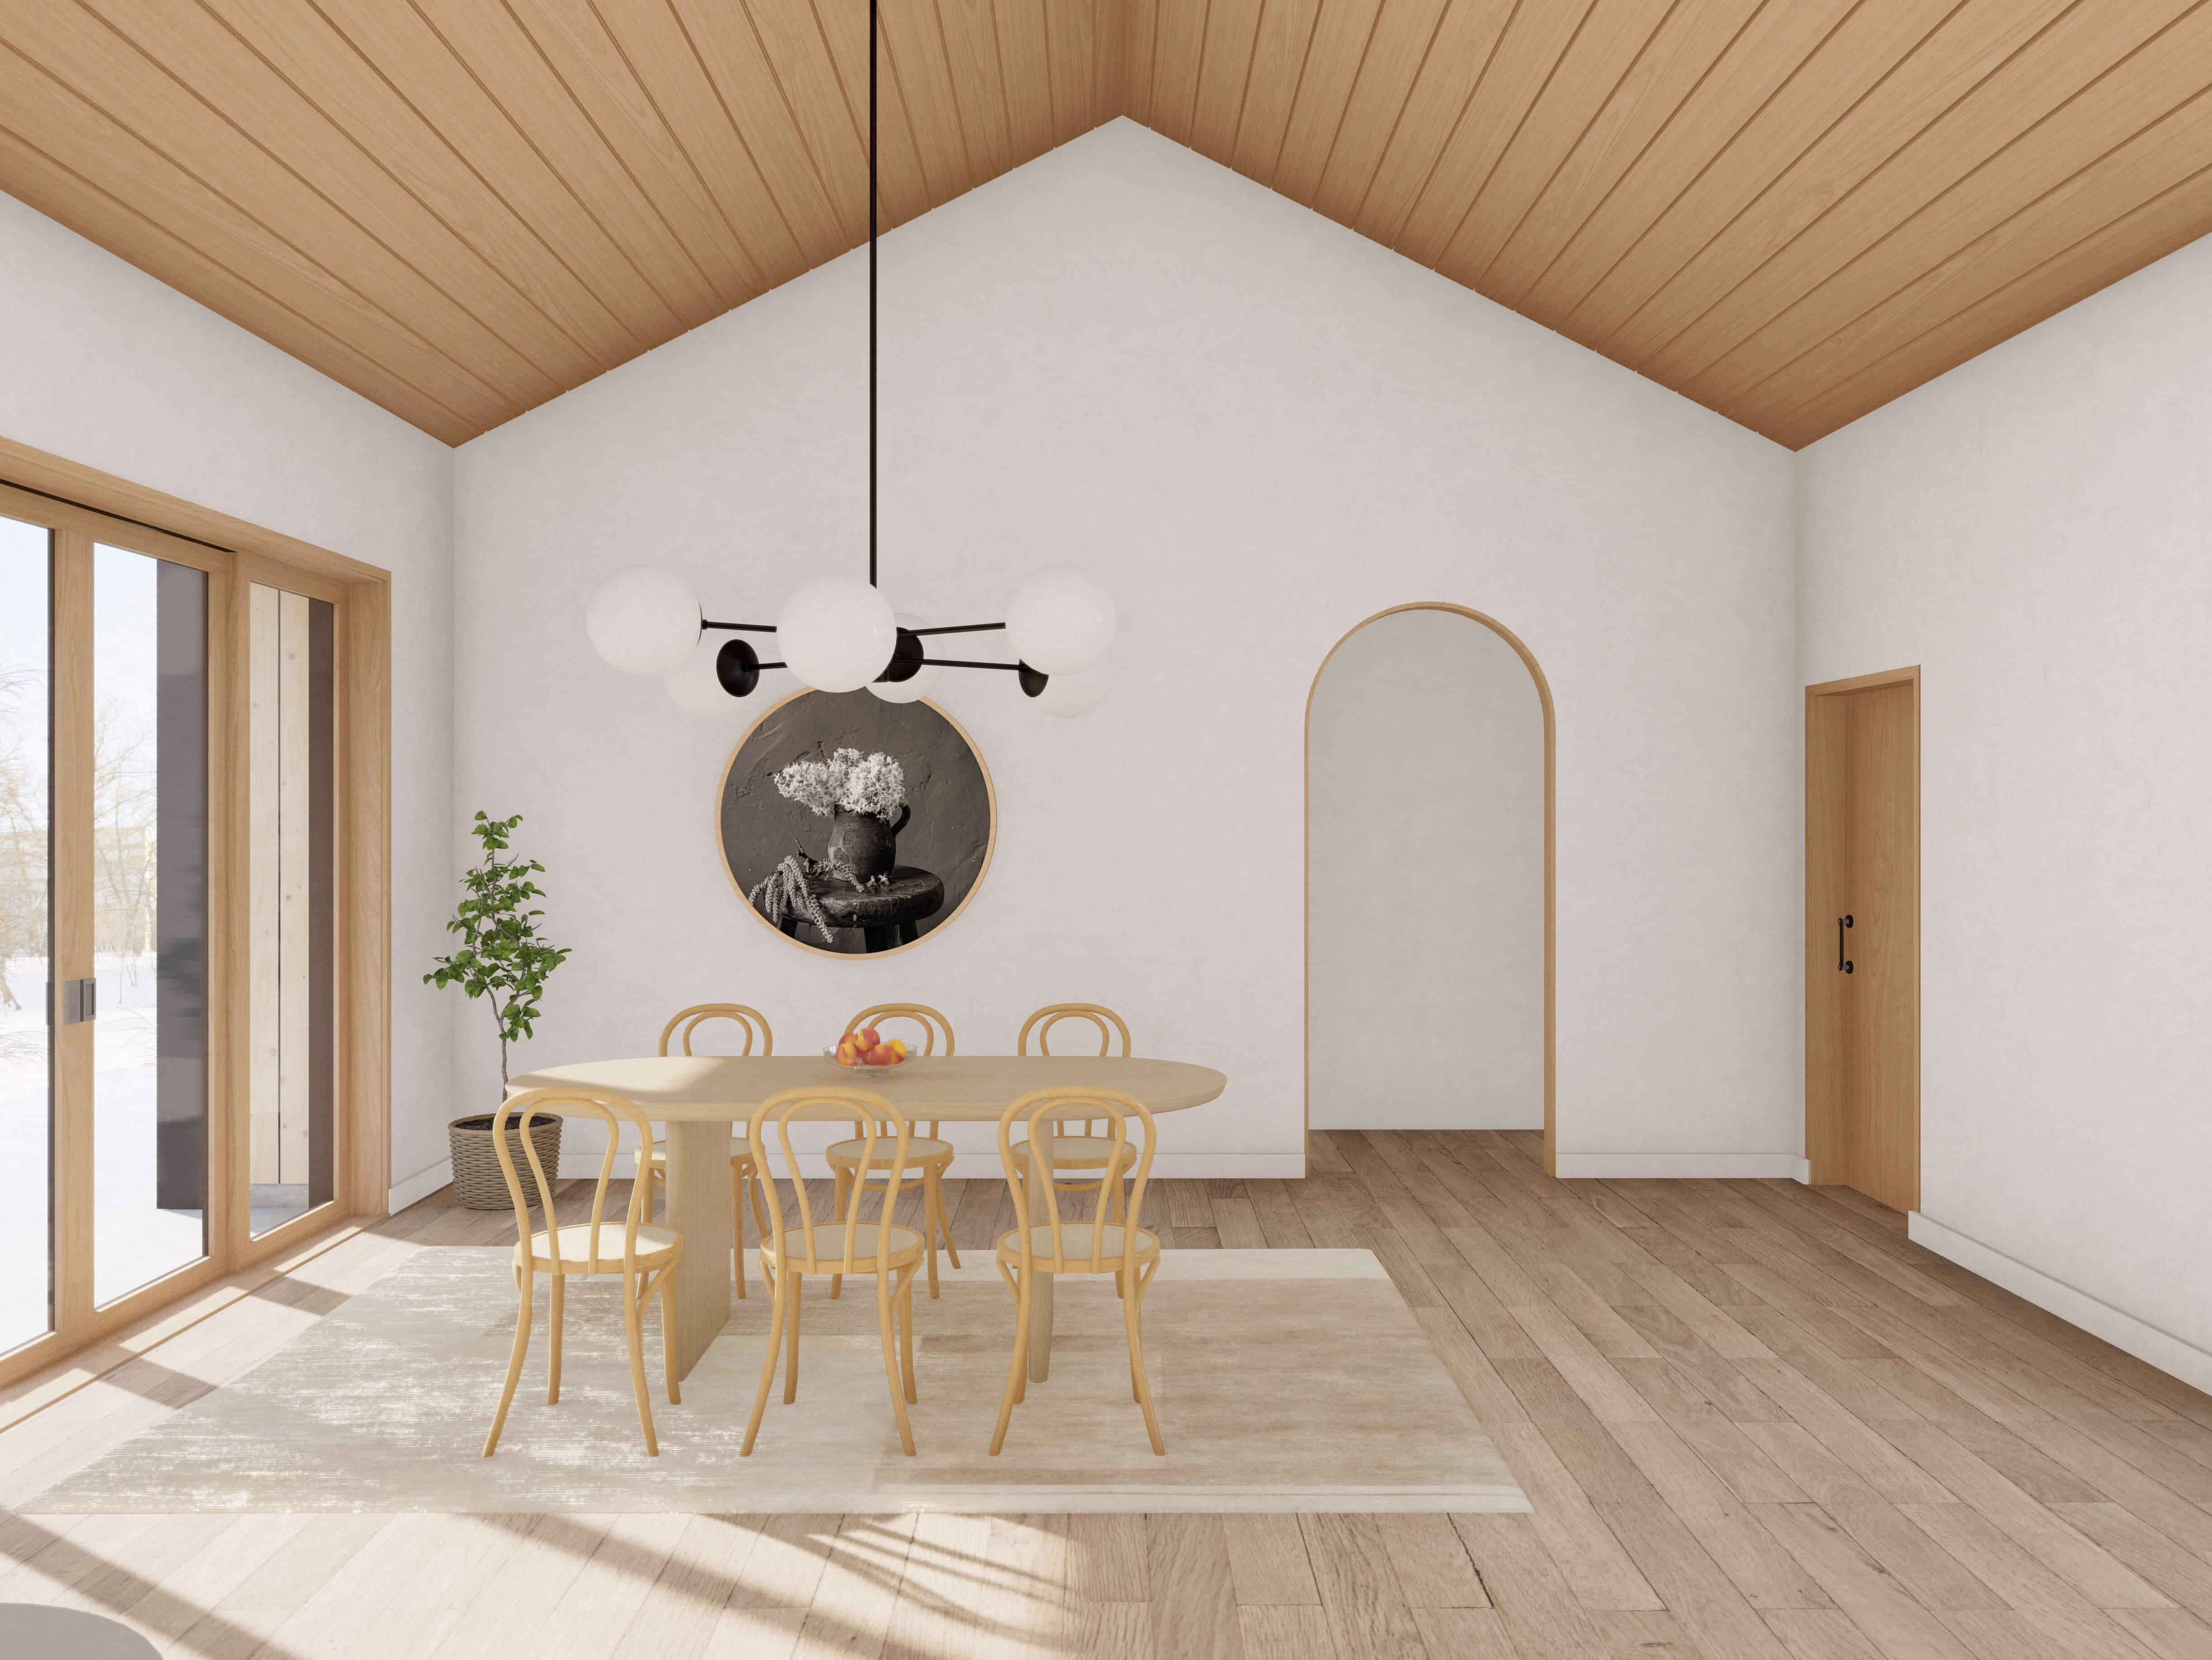 DesignwithFRANK's 2 Bedroom Modern Large Cabin. Open Plan Dining. Wood Floor and ceiling with white walls